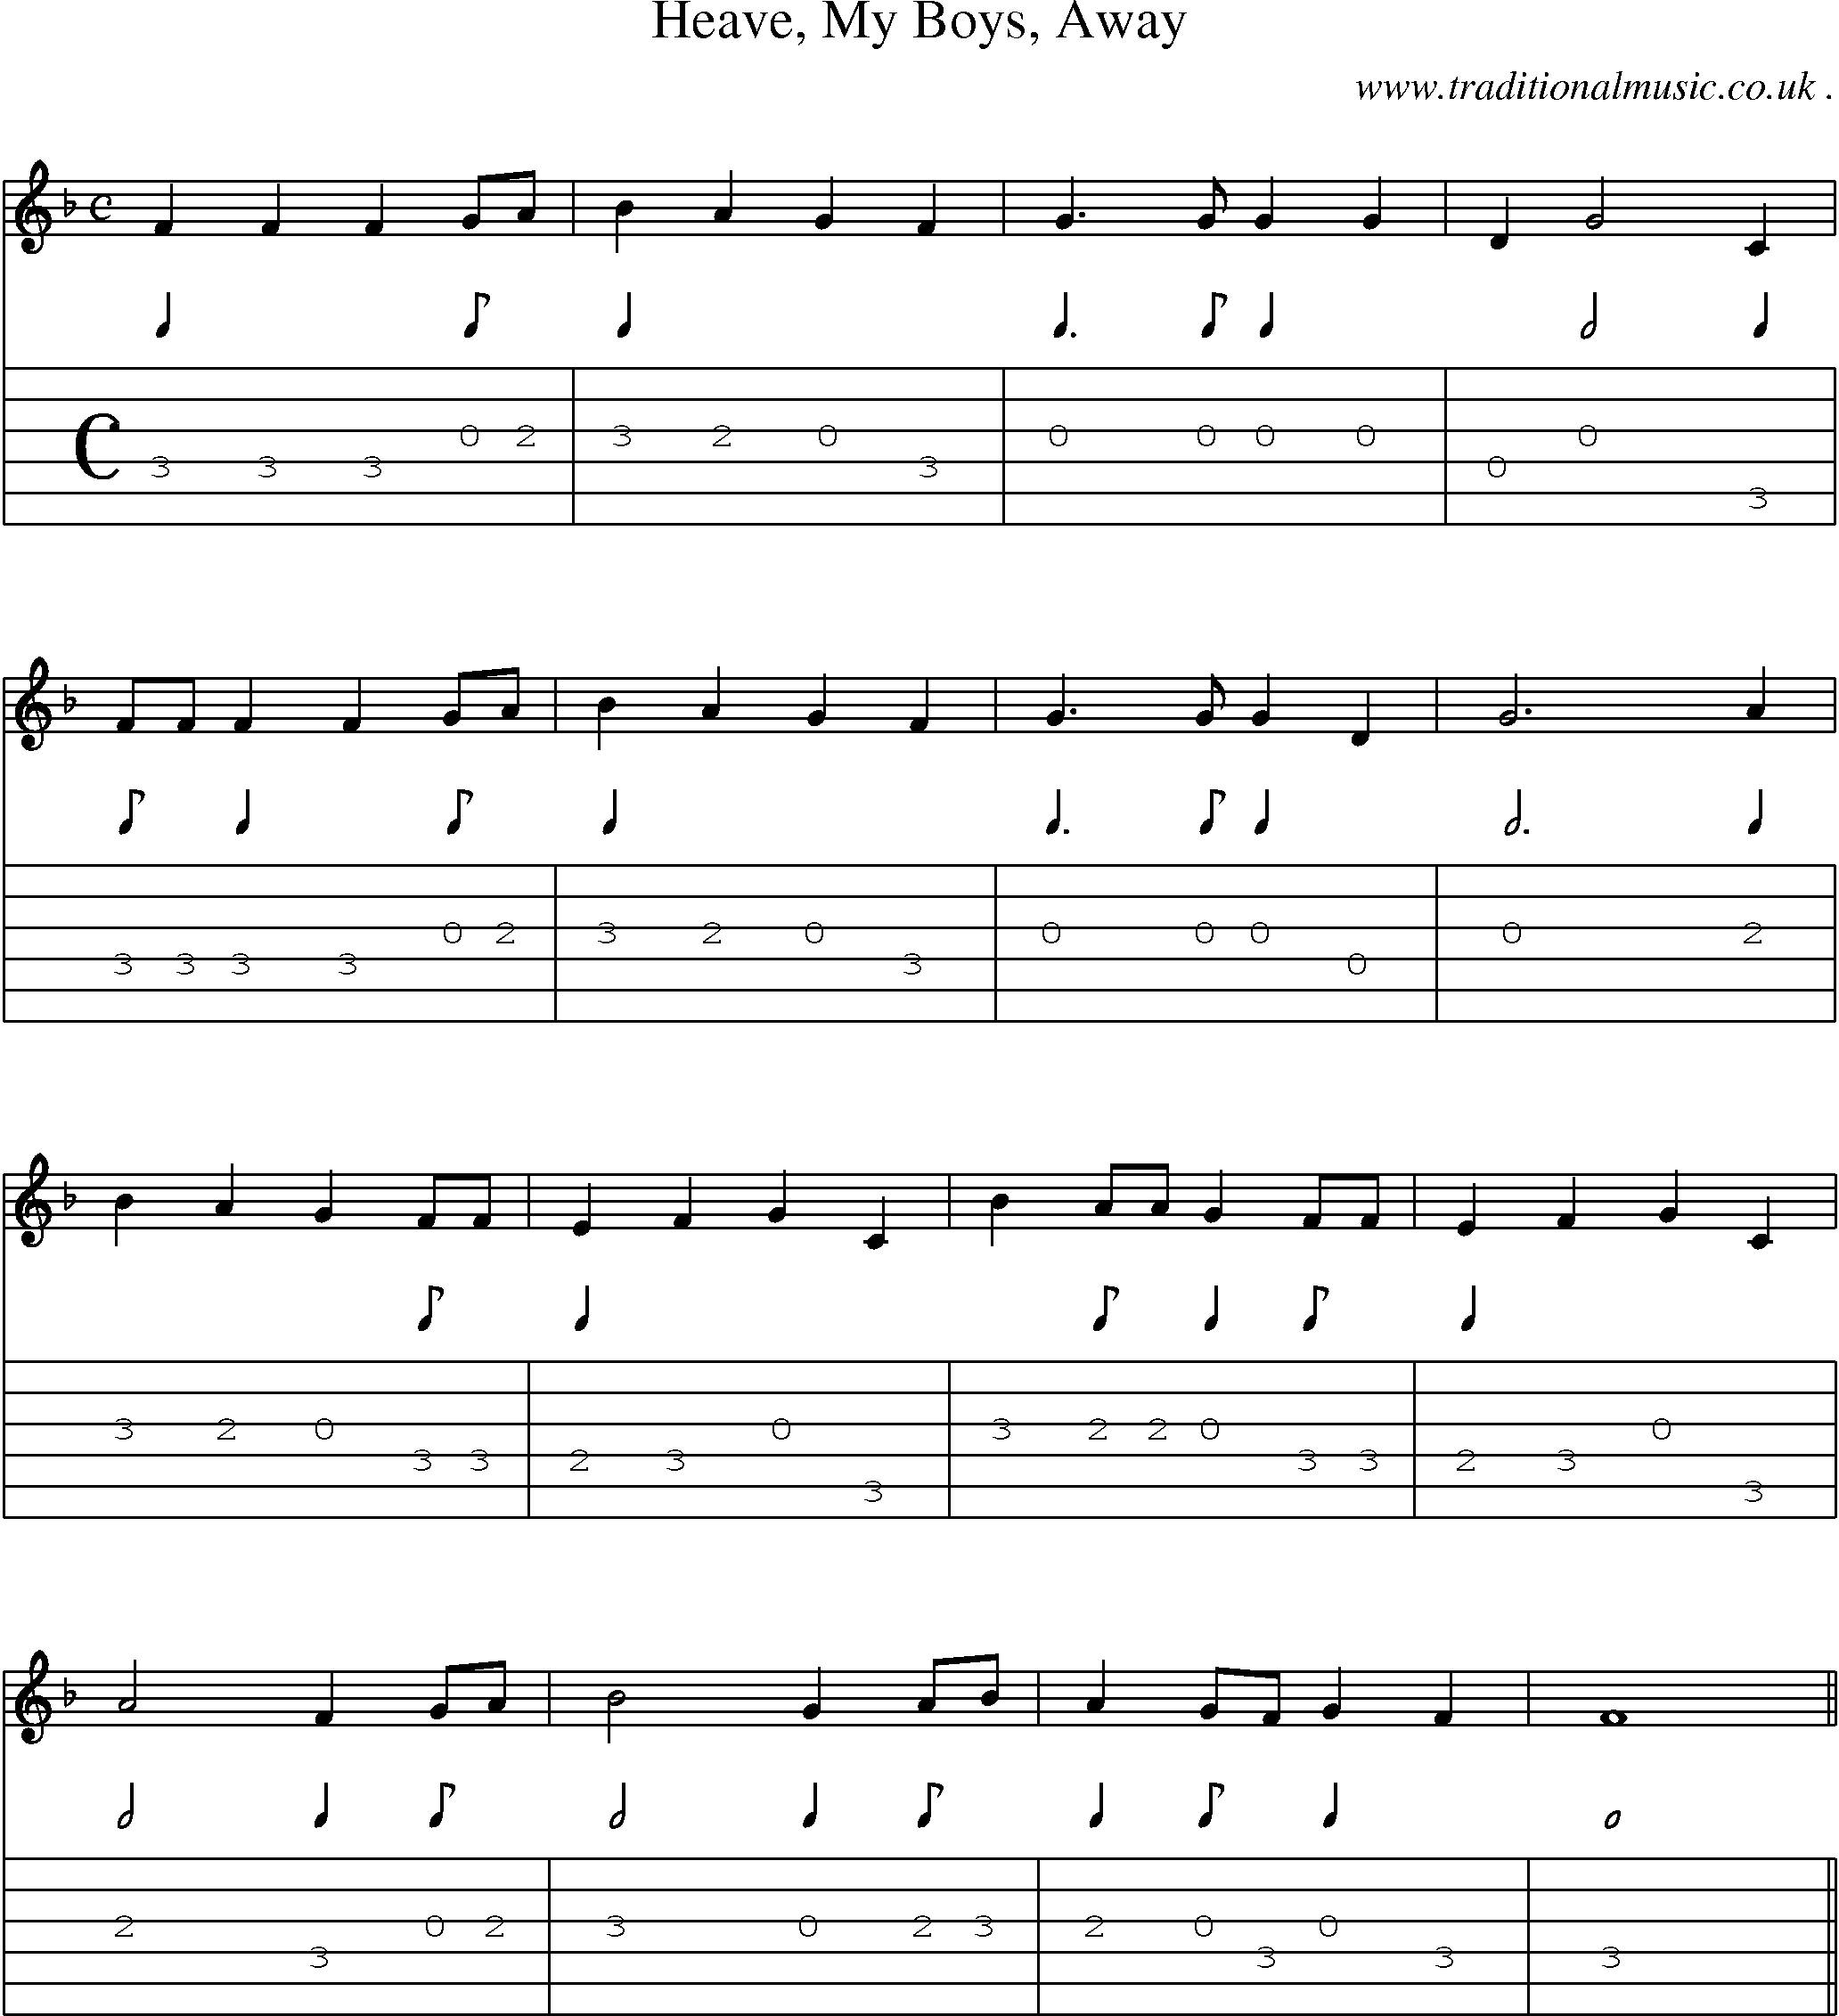 Sheet-Music and Guitar Tabs for Heave My Boys Away